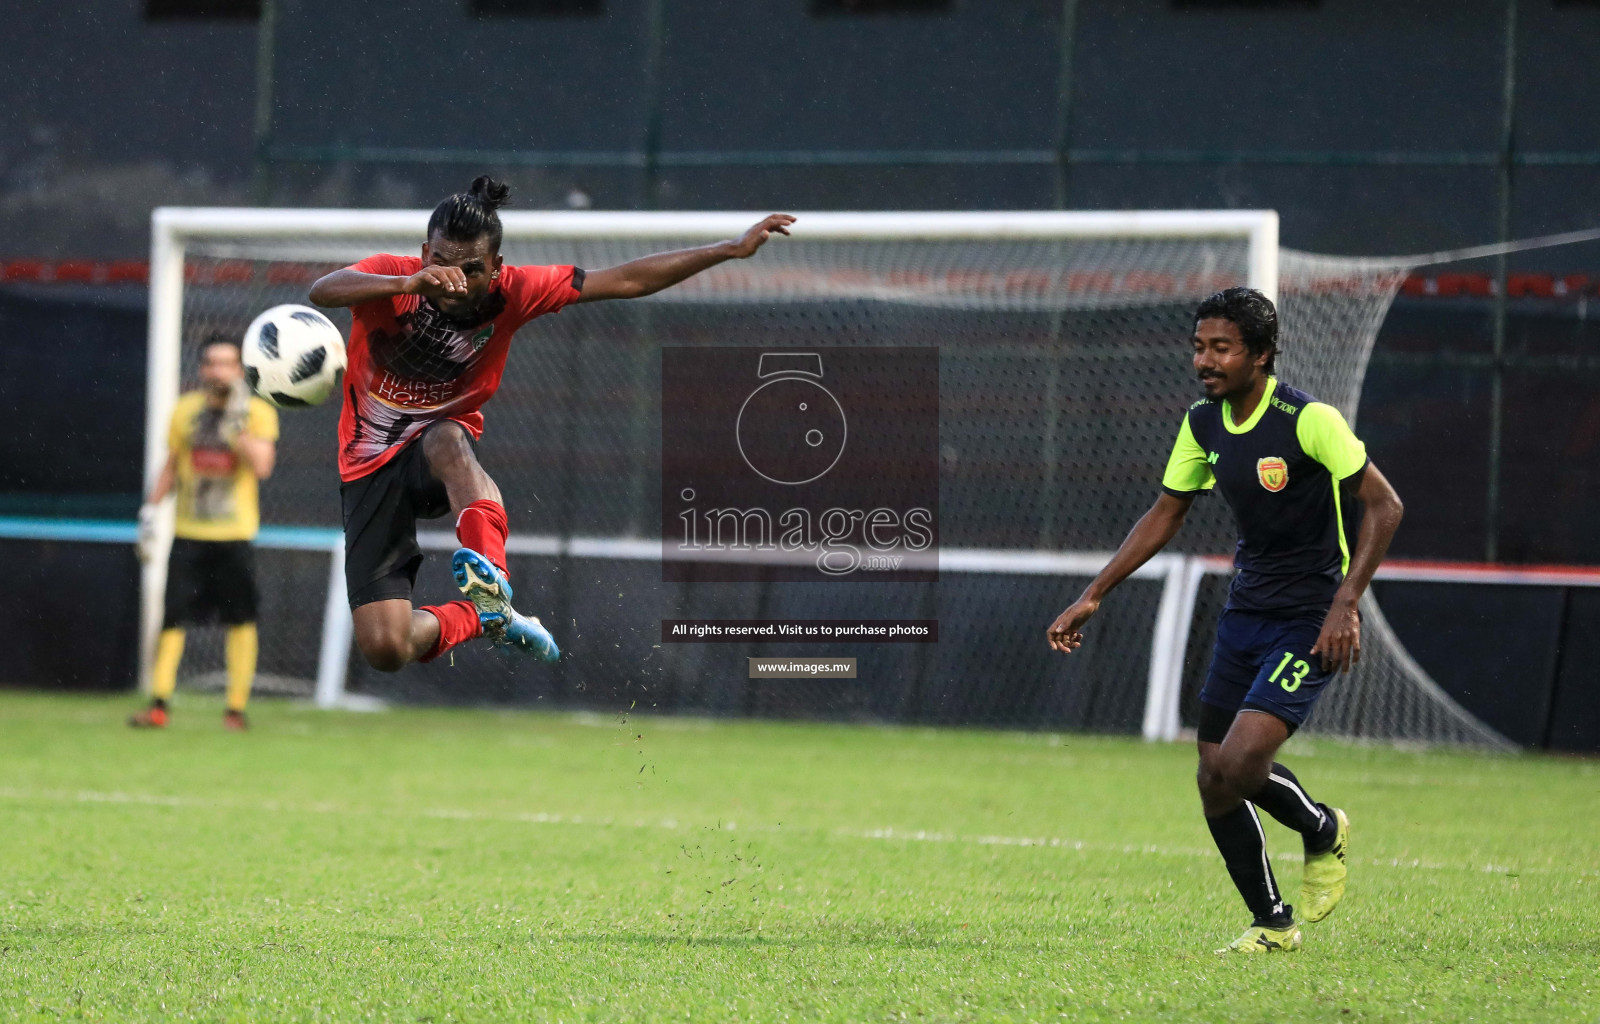 Foakaidhoo FC vs United Victory in Dhiraagu Dhivehi Premier League held in Male', Maldives on 17th December 2019 Photos: Abdulla Abeedh/images.mv